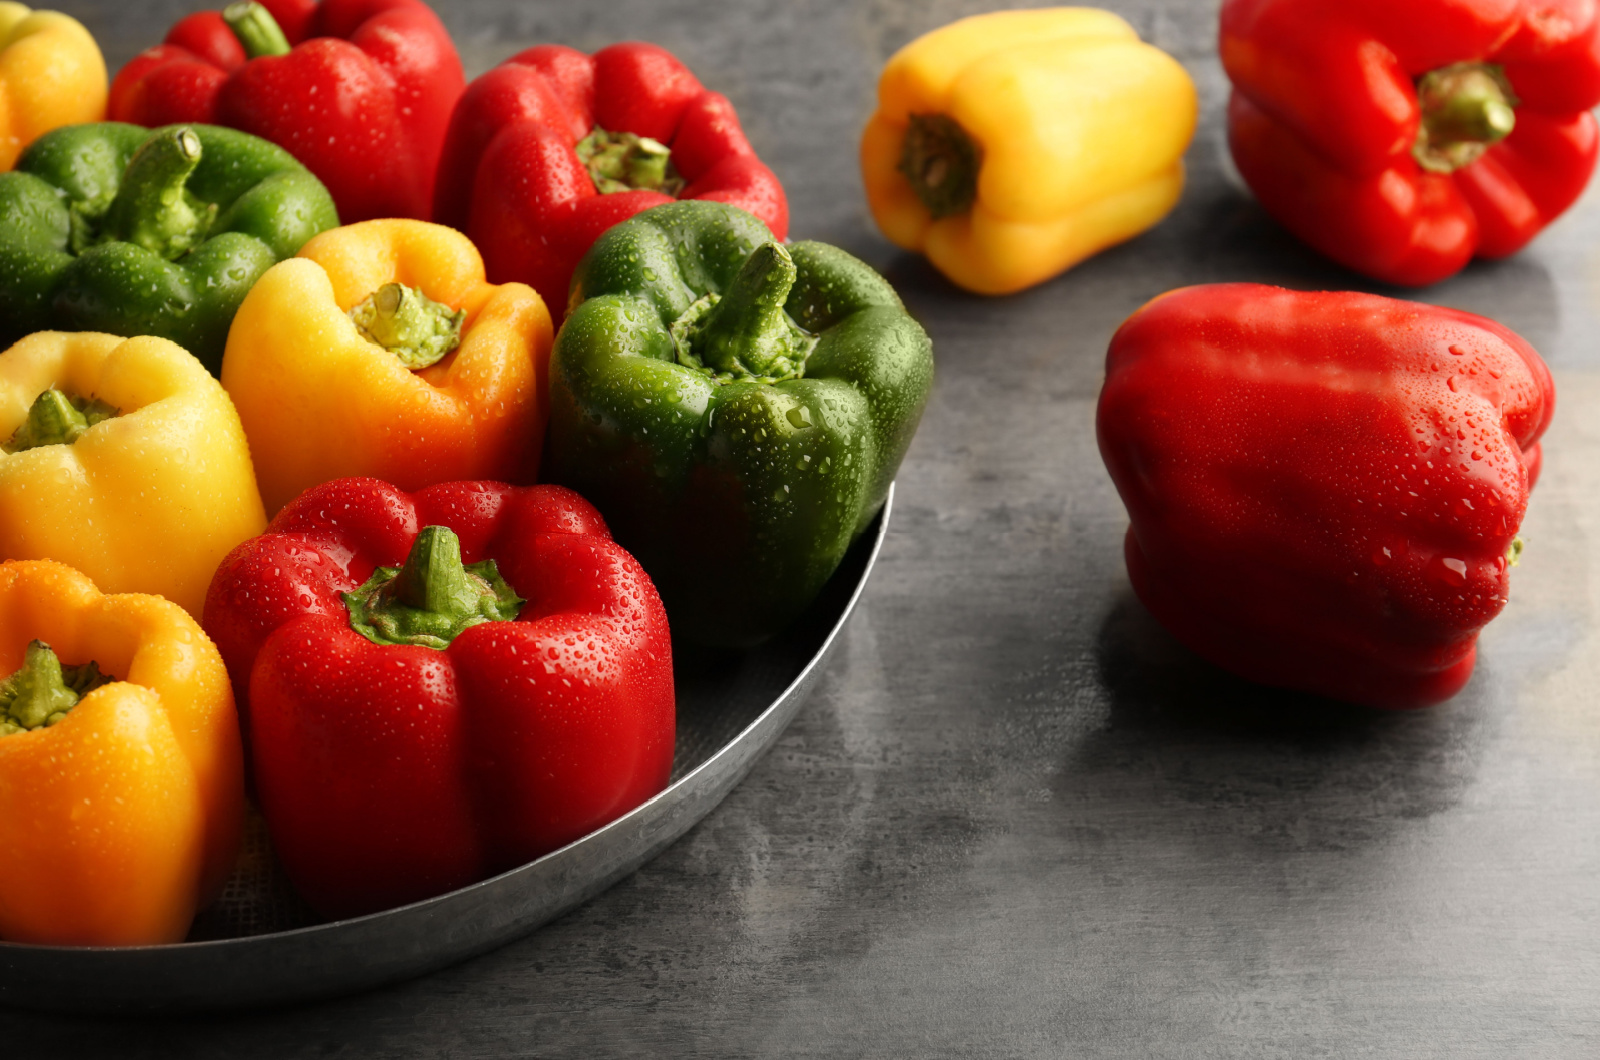 Red, green and yellow sweet bell peppers on table